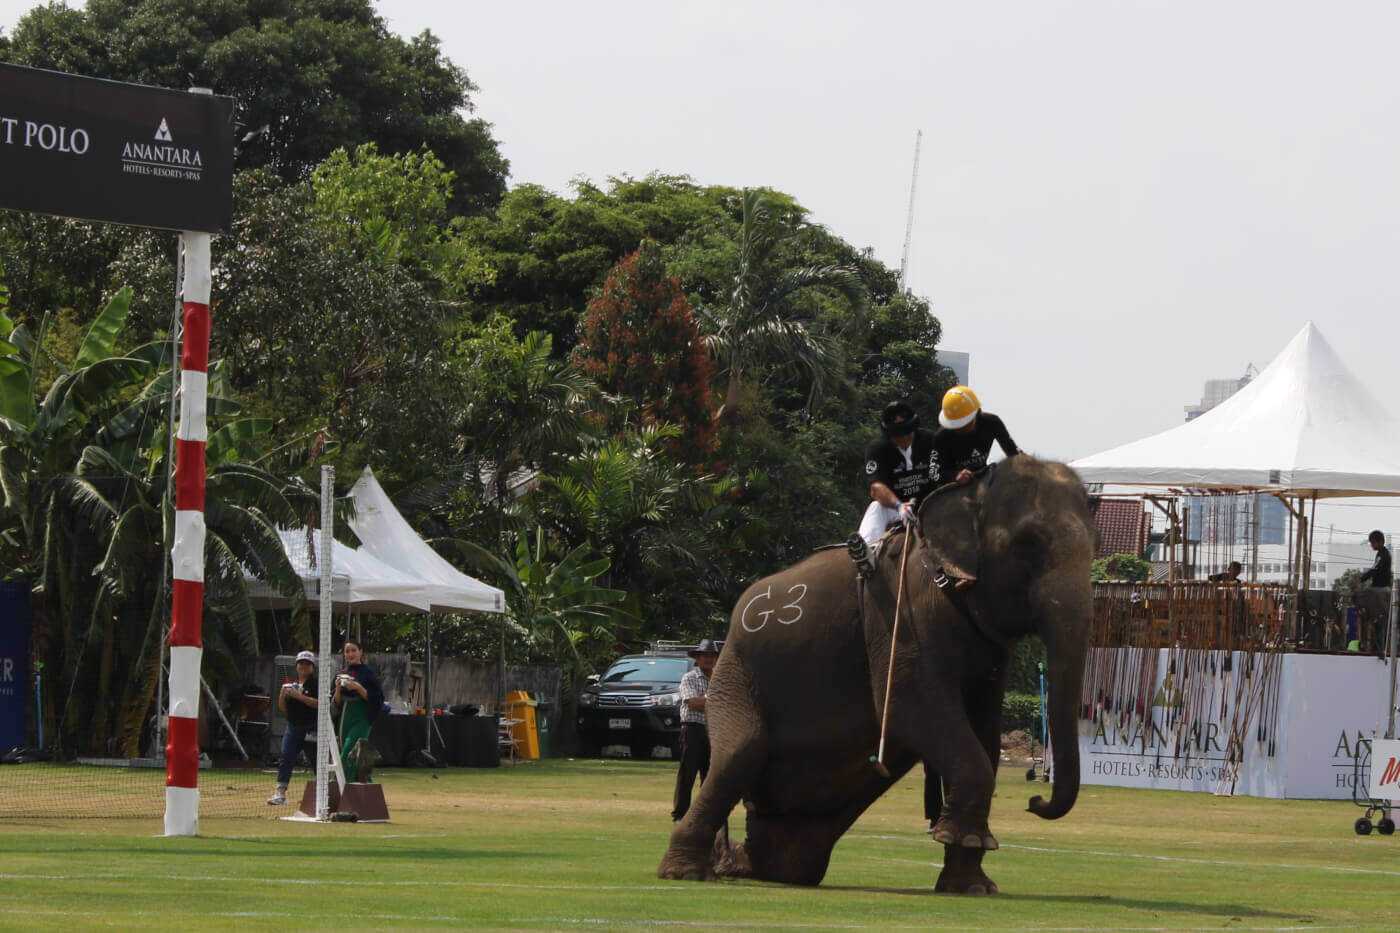 UPDATE: Thailand’s King’s Cup Elephant Polo Tournament Is No More!